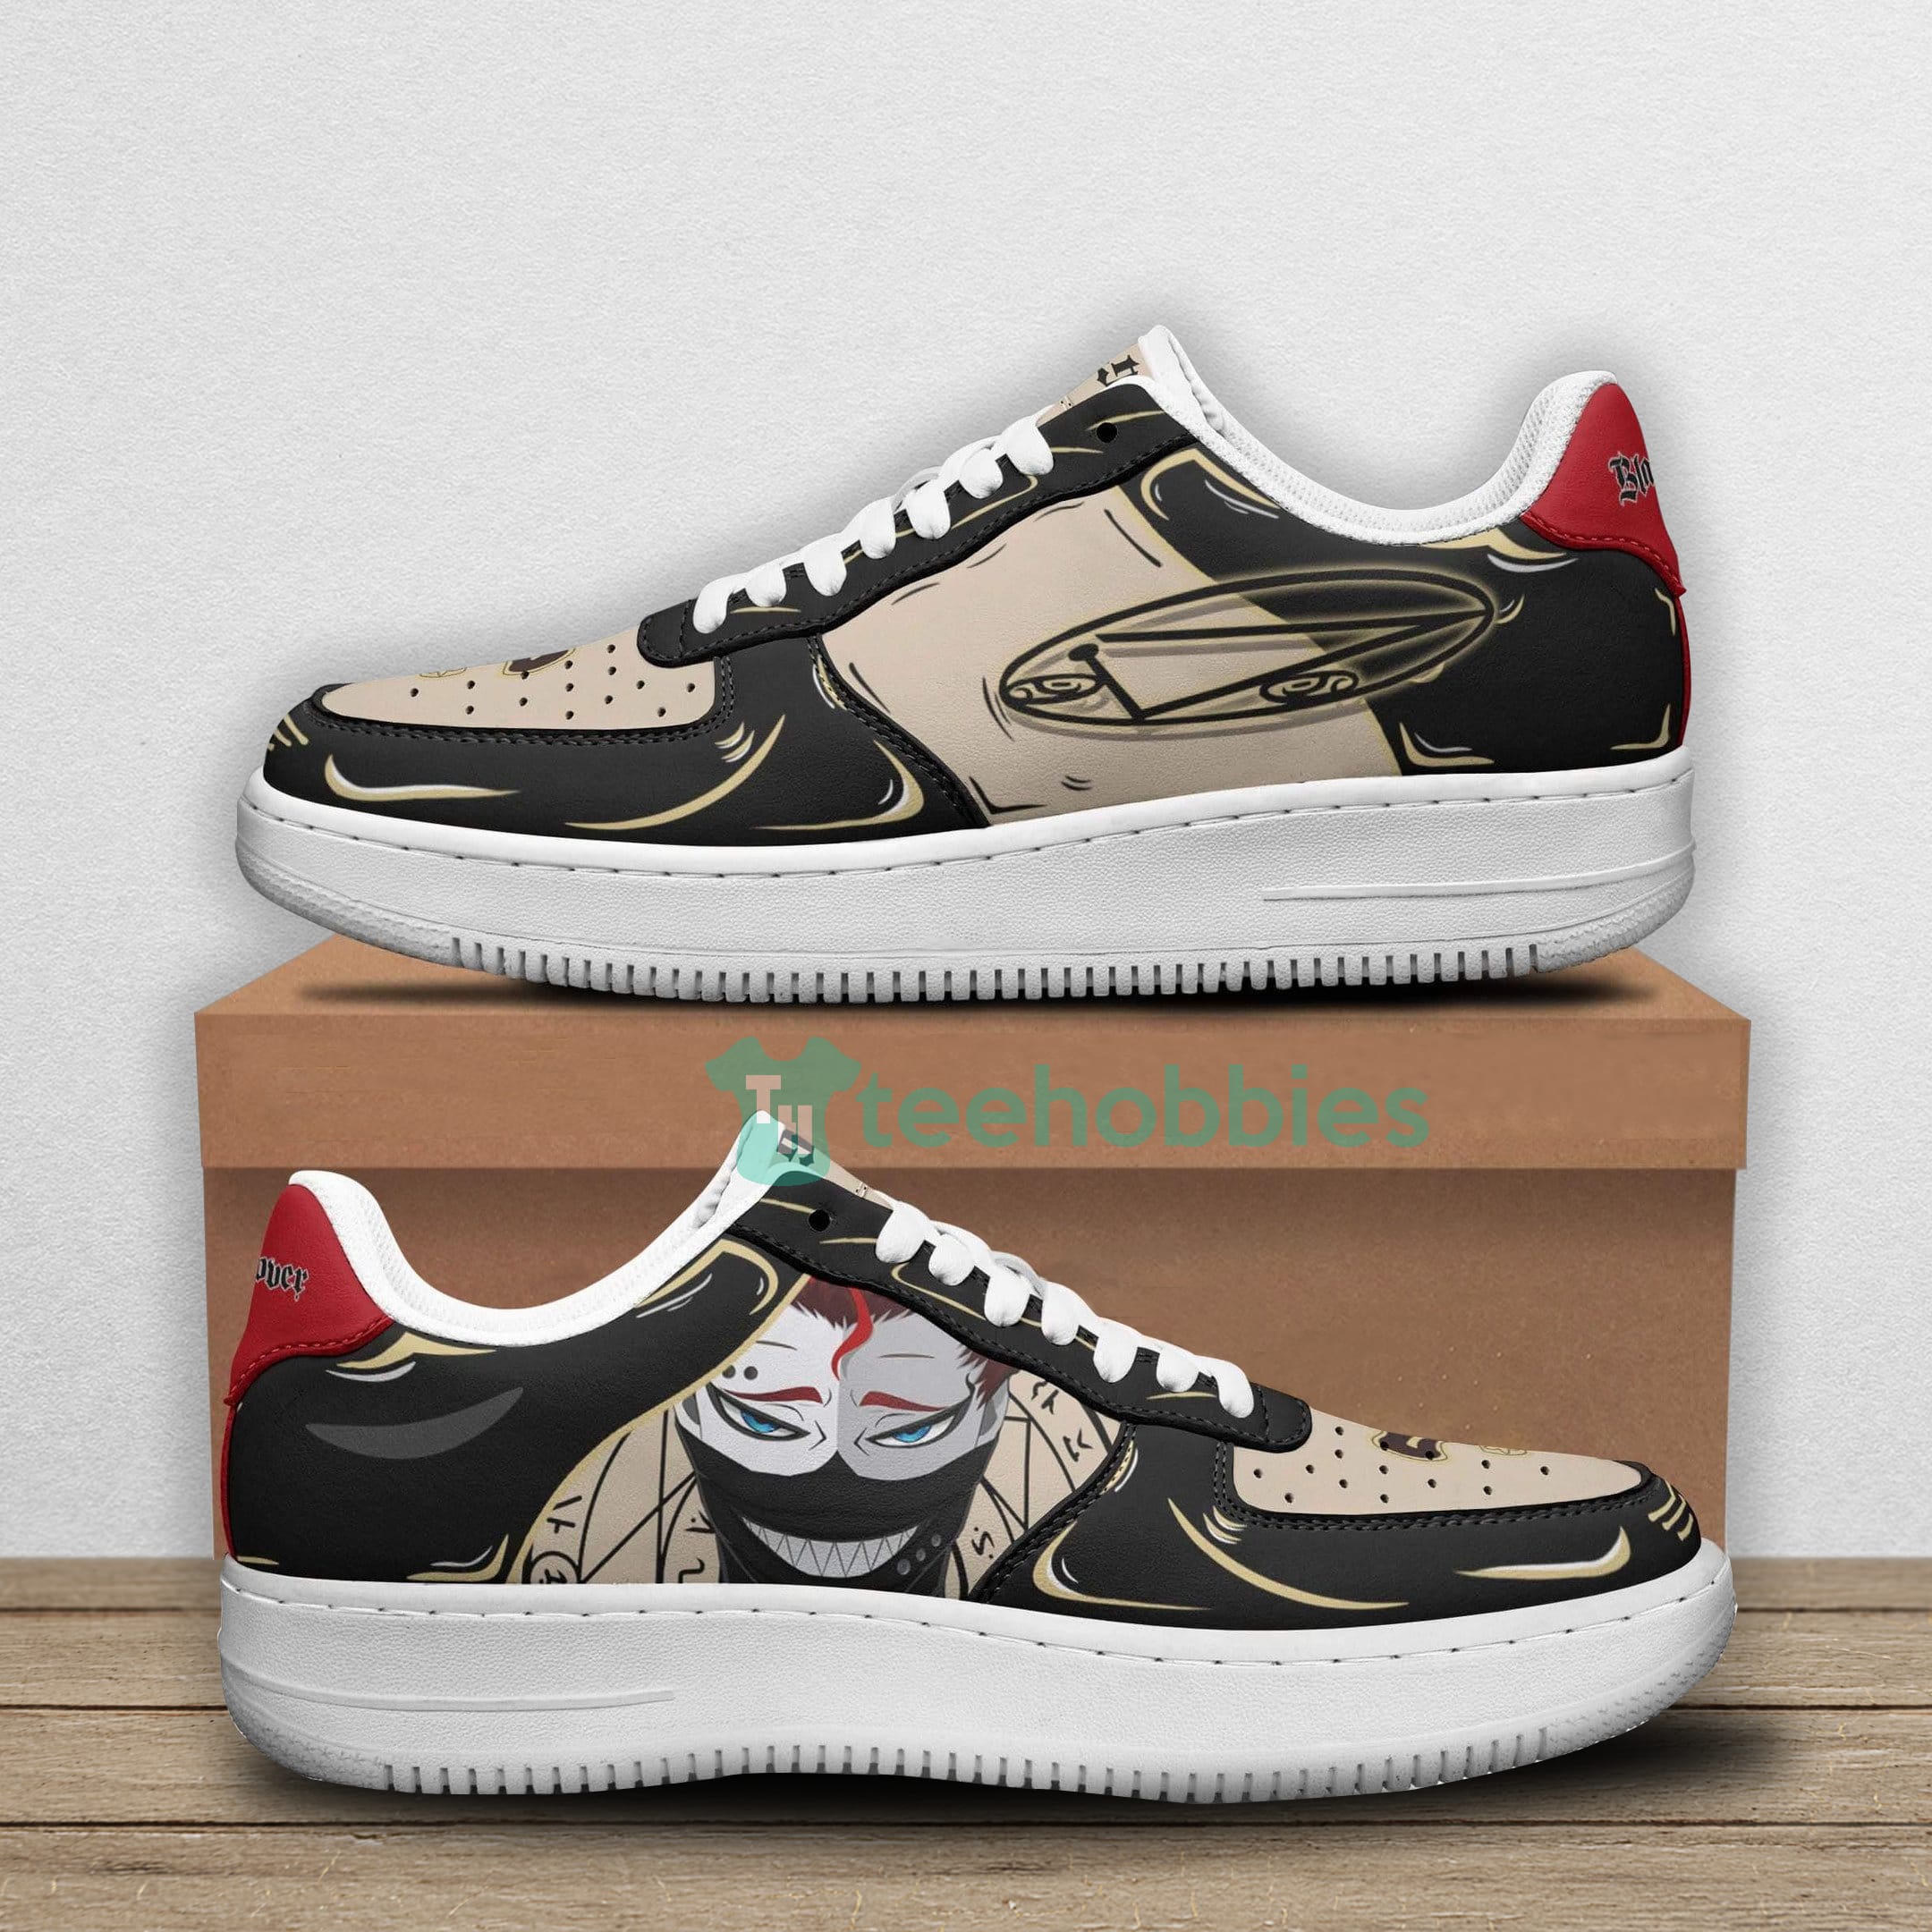 Zora Ideale Custom Black Clover Anime For Fans Air Force Shoes